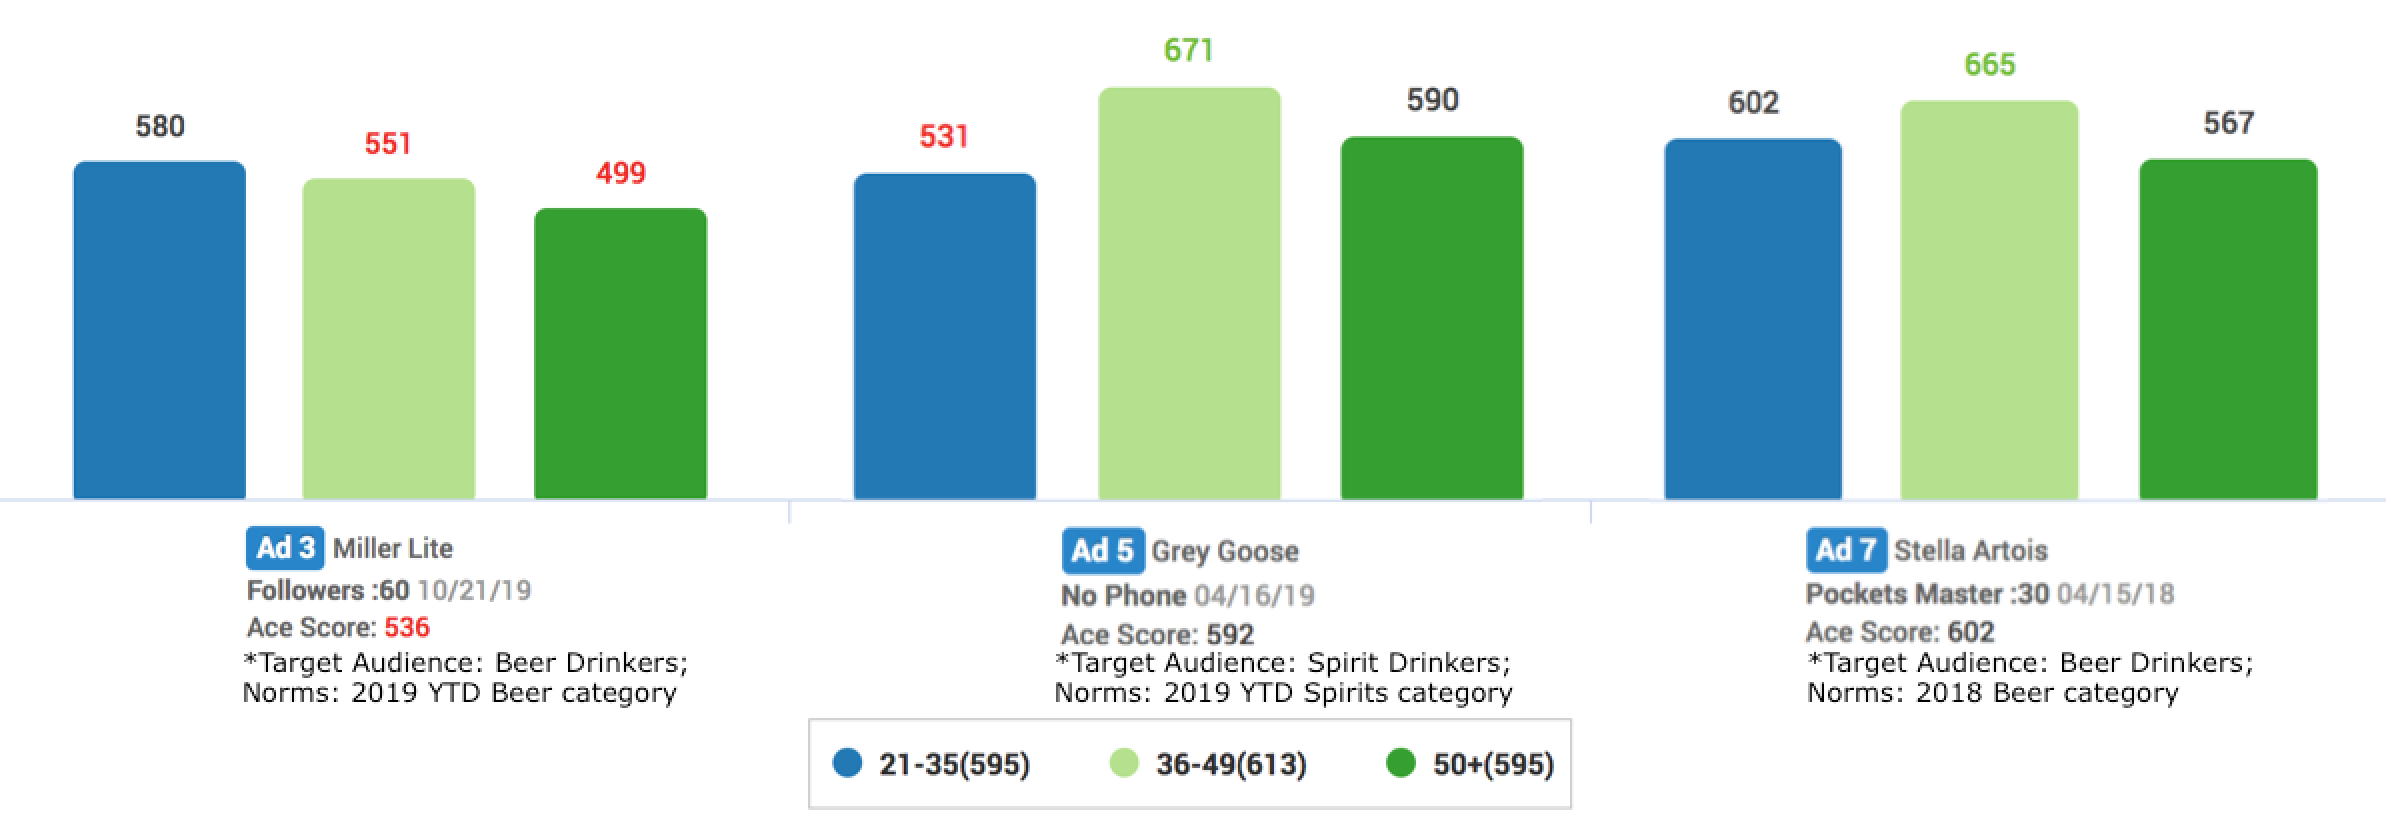 Ace Score by Age for Miller Lite, Grey Goose, Stella Artois